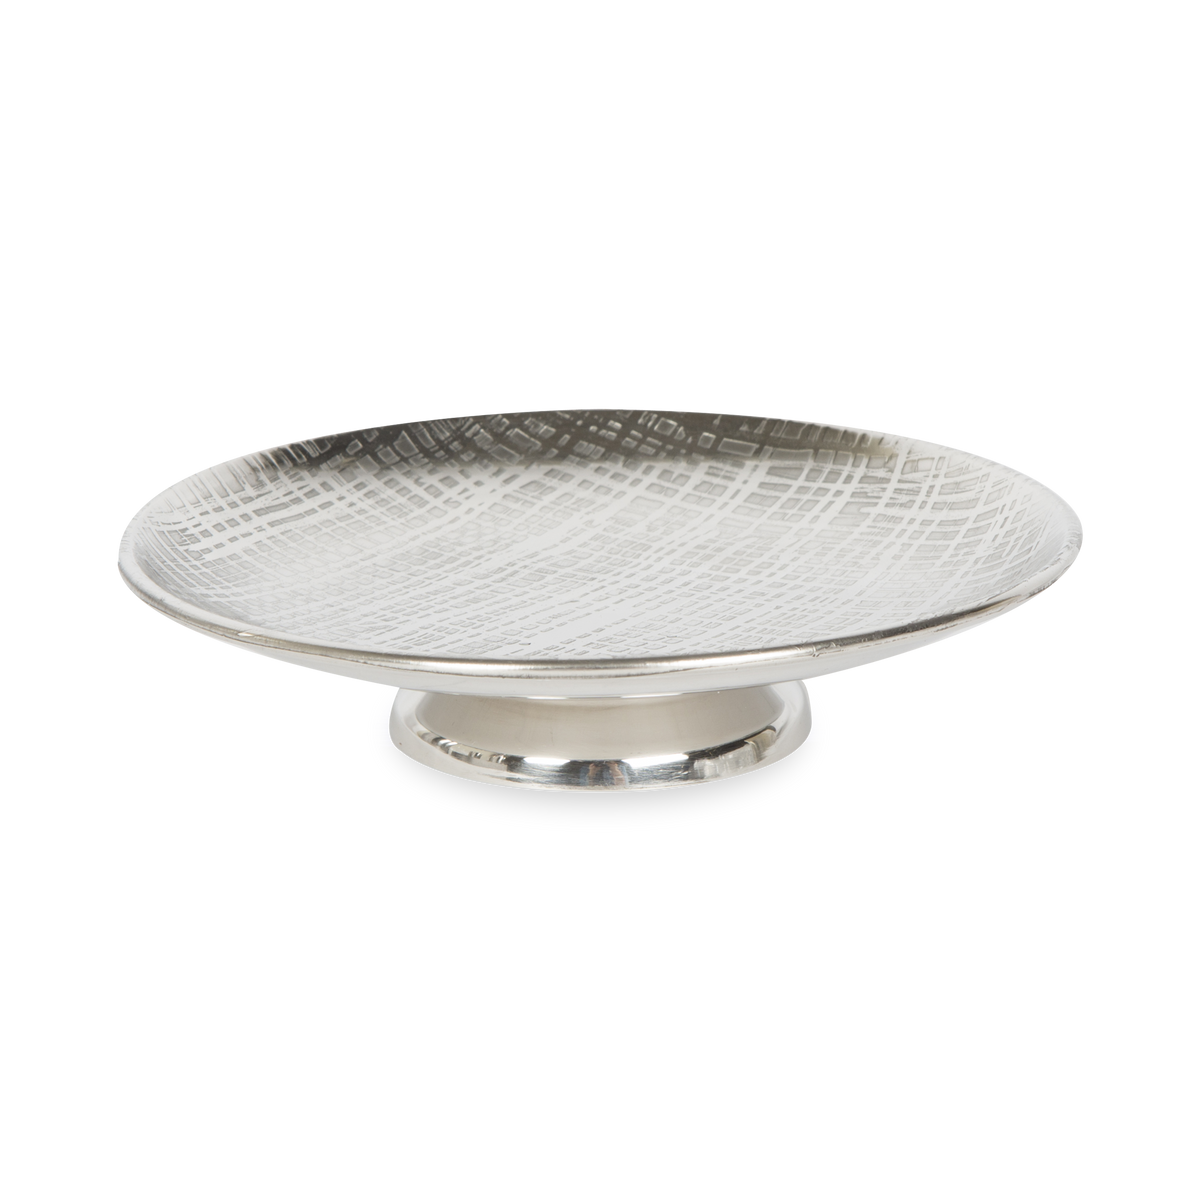 The Crosshatch Soap Dish is made of stainless steel and is finished in a rich, distinct crosshatch texture.